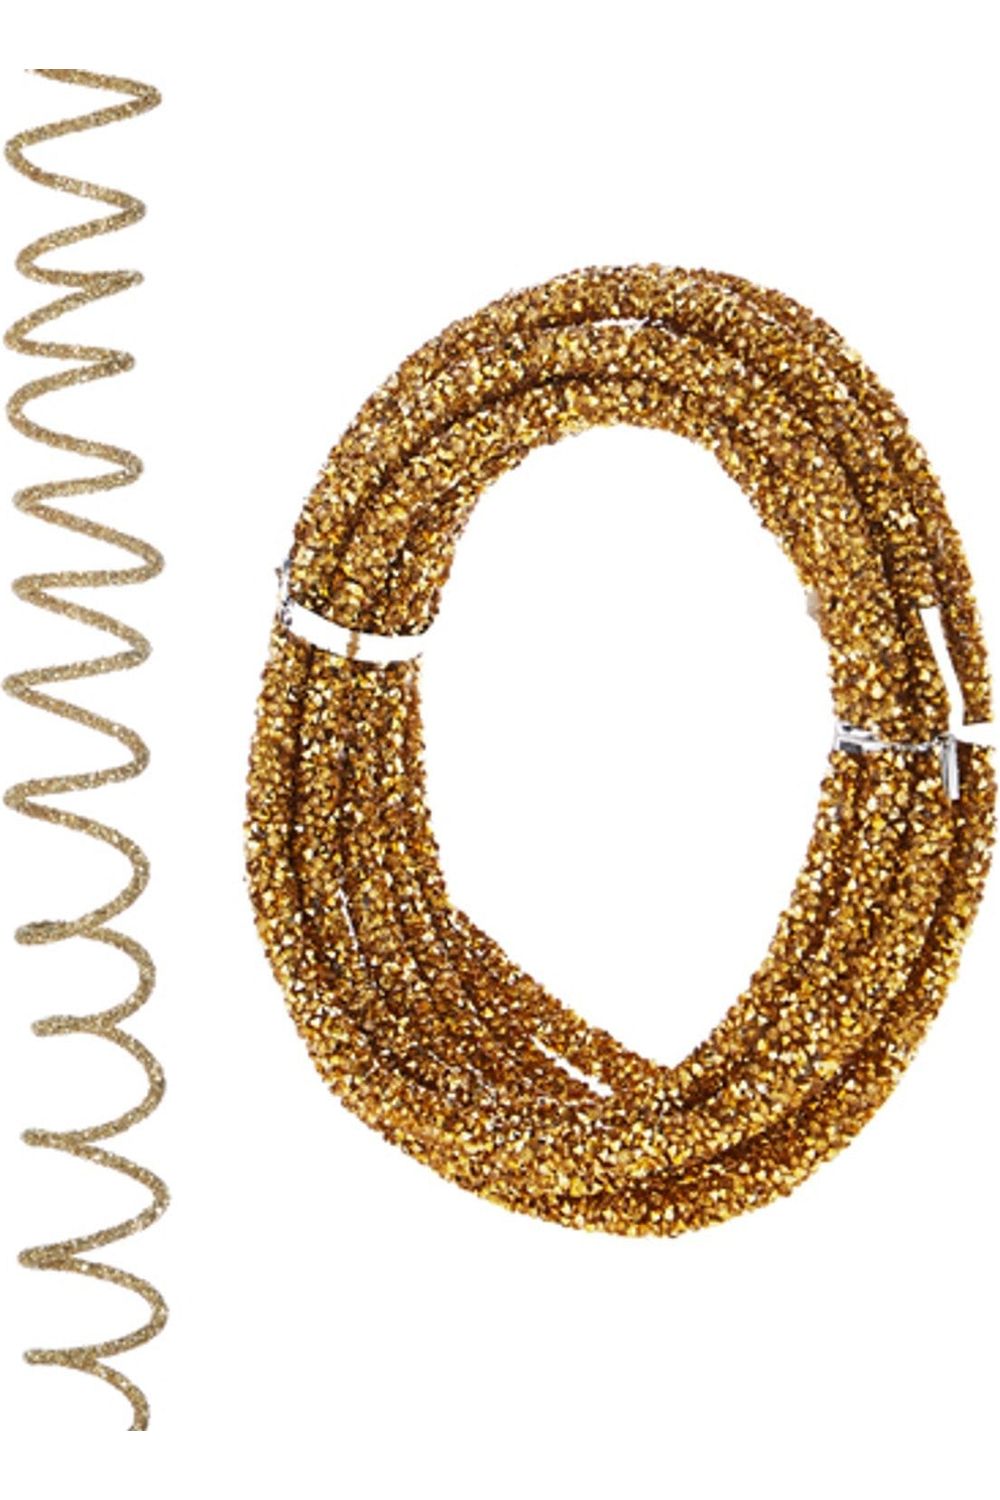 Shop For 10' Gold Glittered Rope Garland G4206838